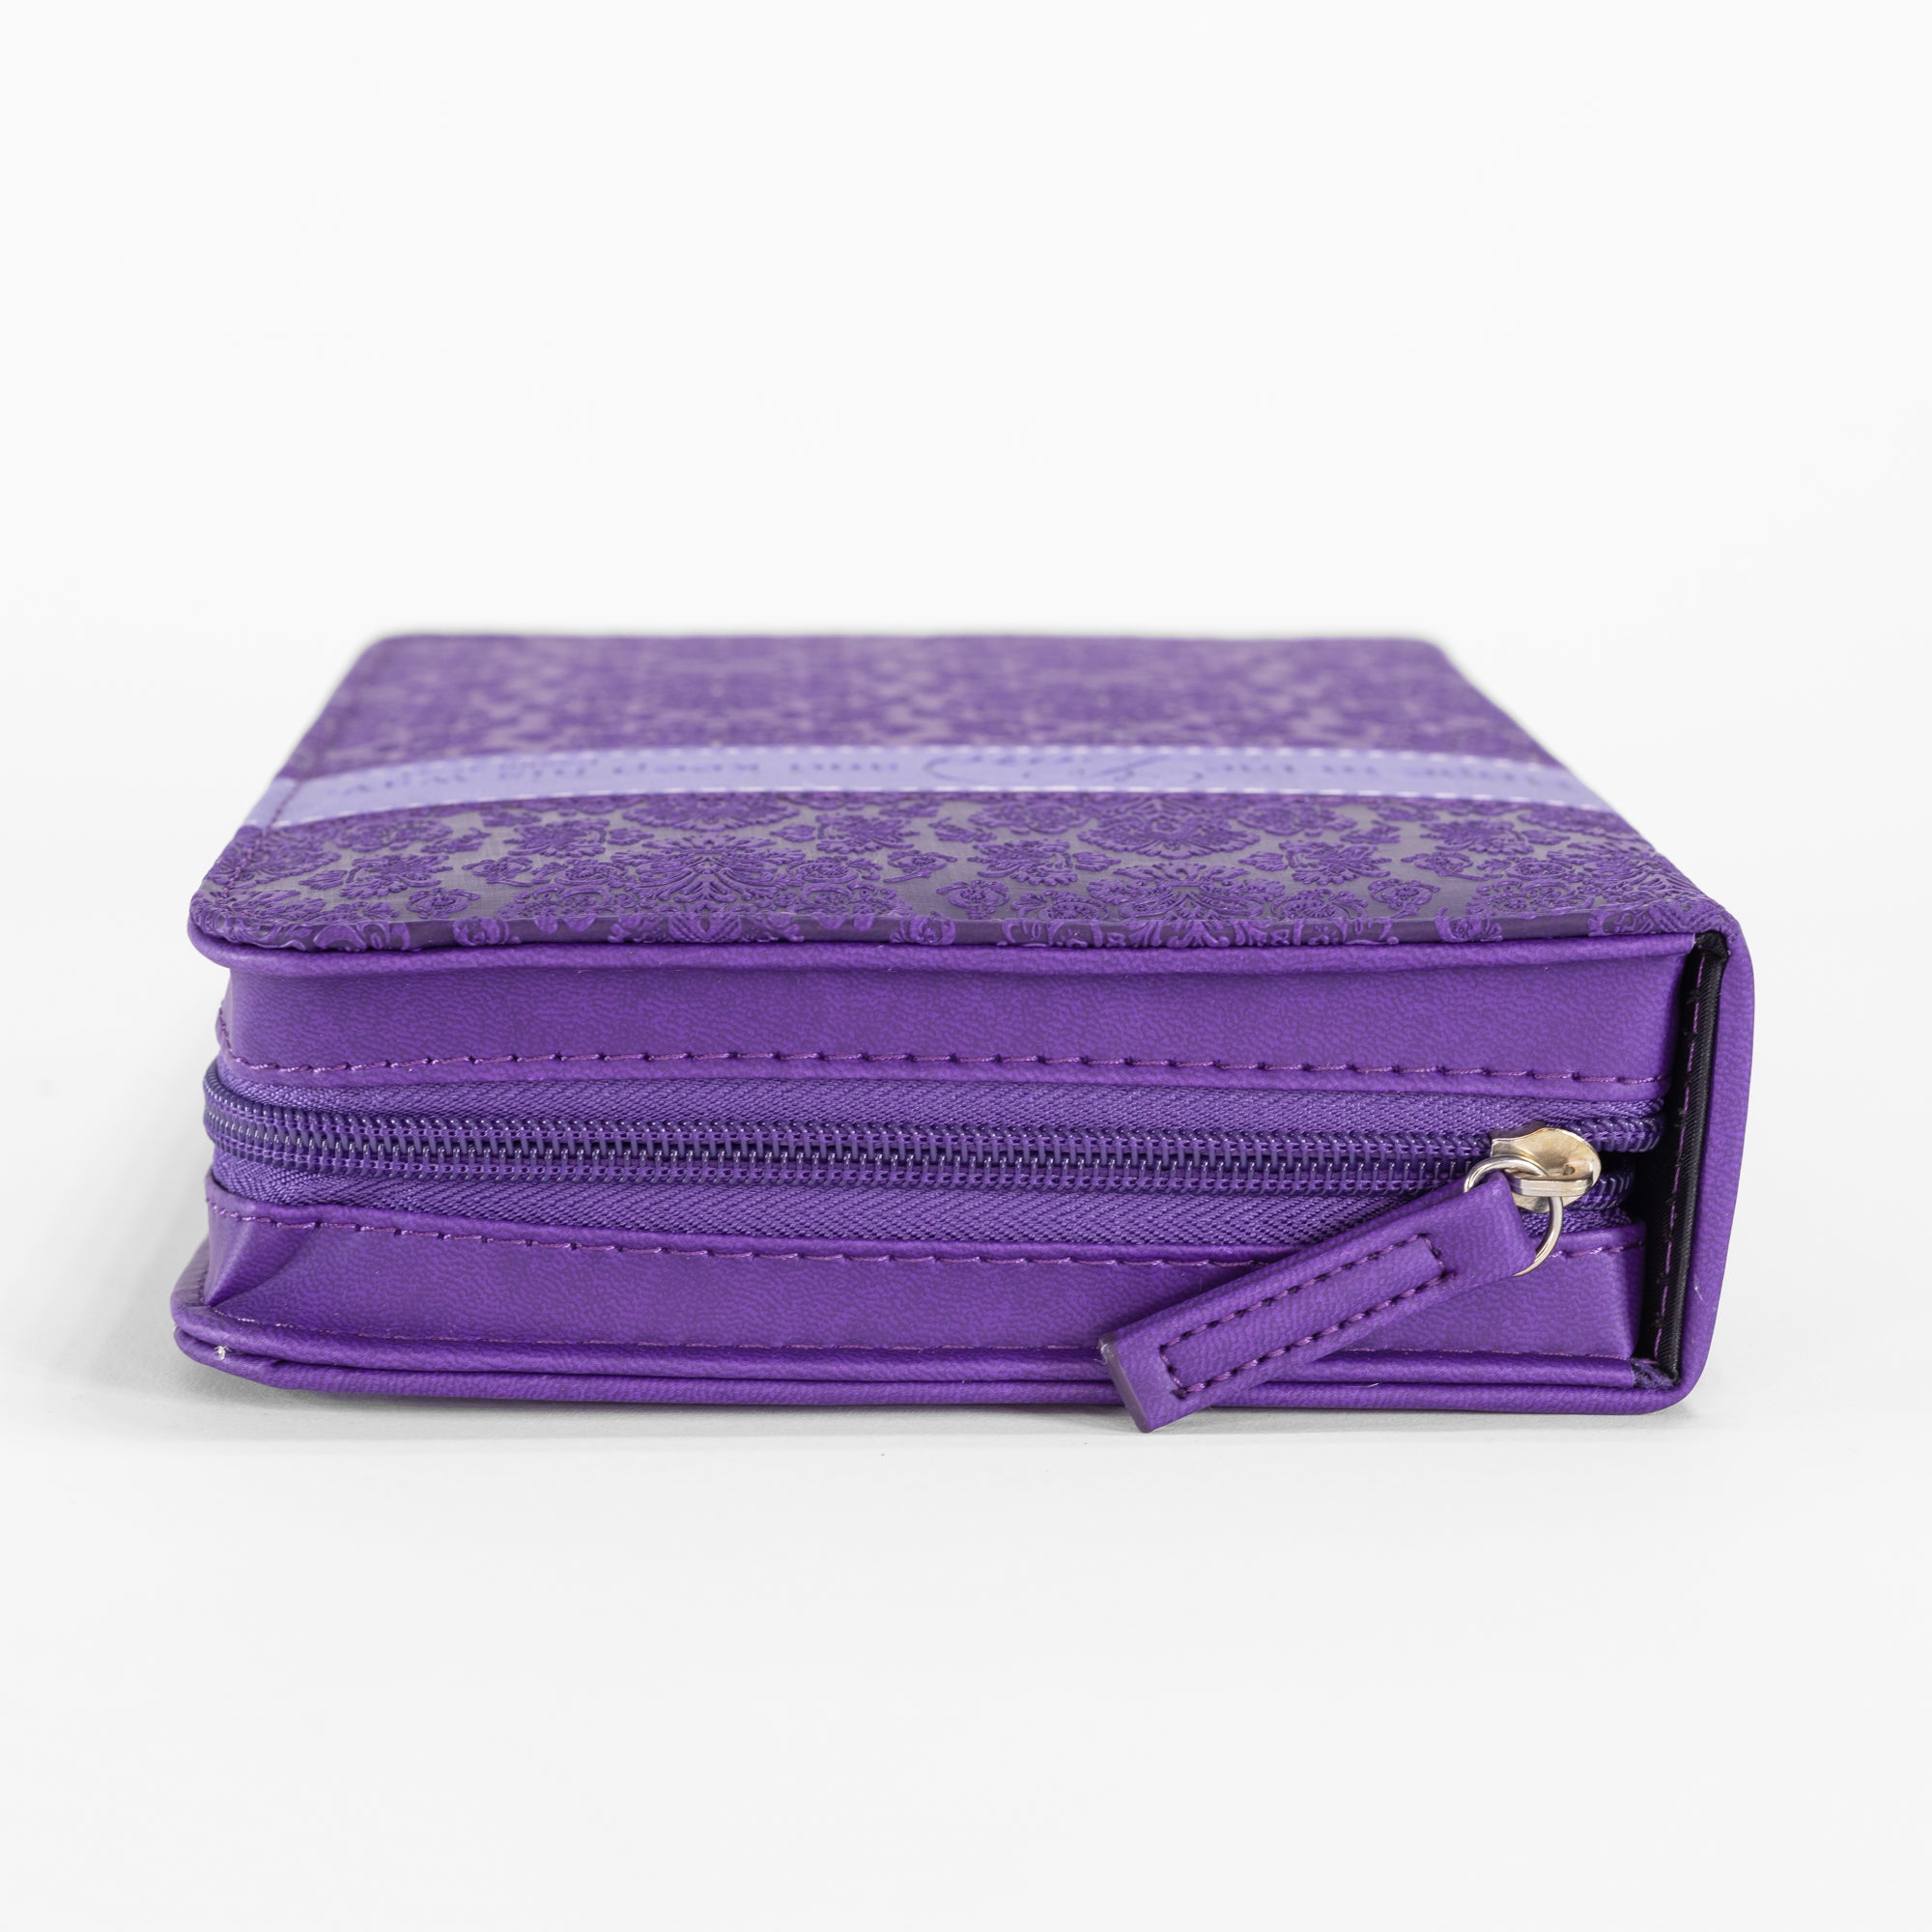 Divine Details: Bible Cover Purple - Hope In The Lord